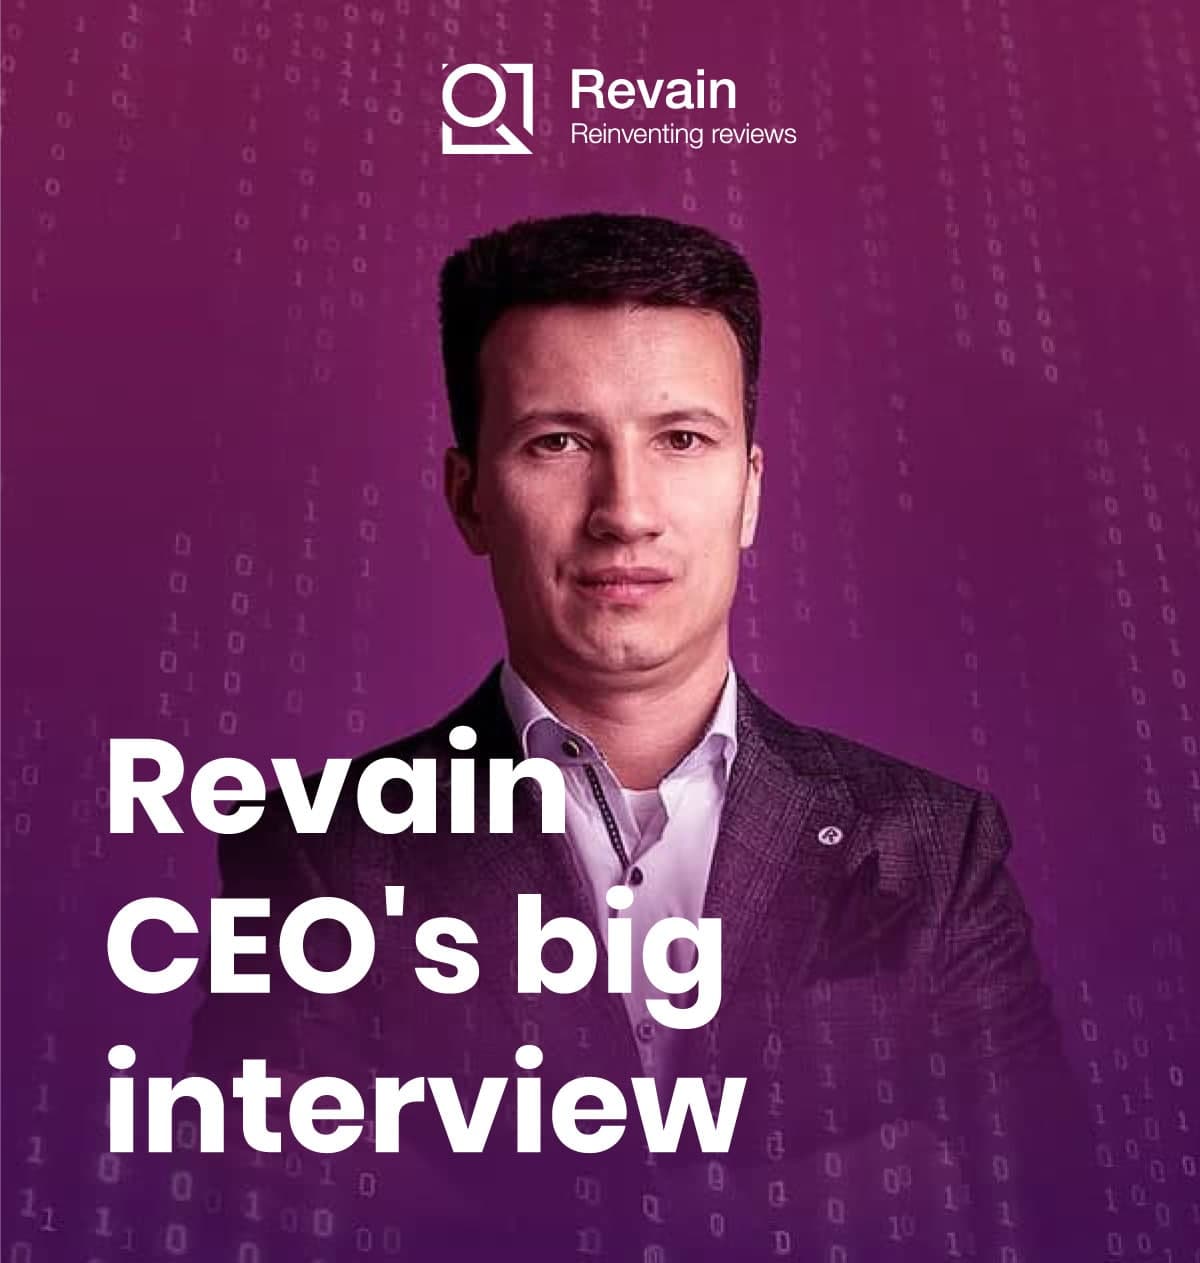 Article Interview with Revain CEO